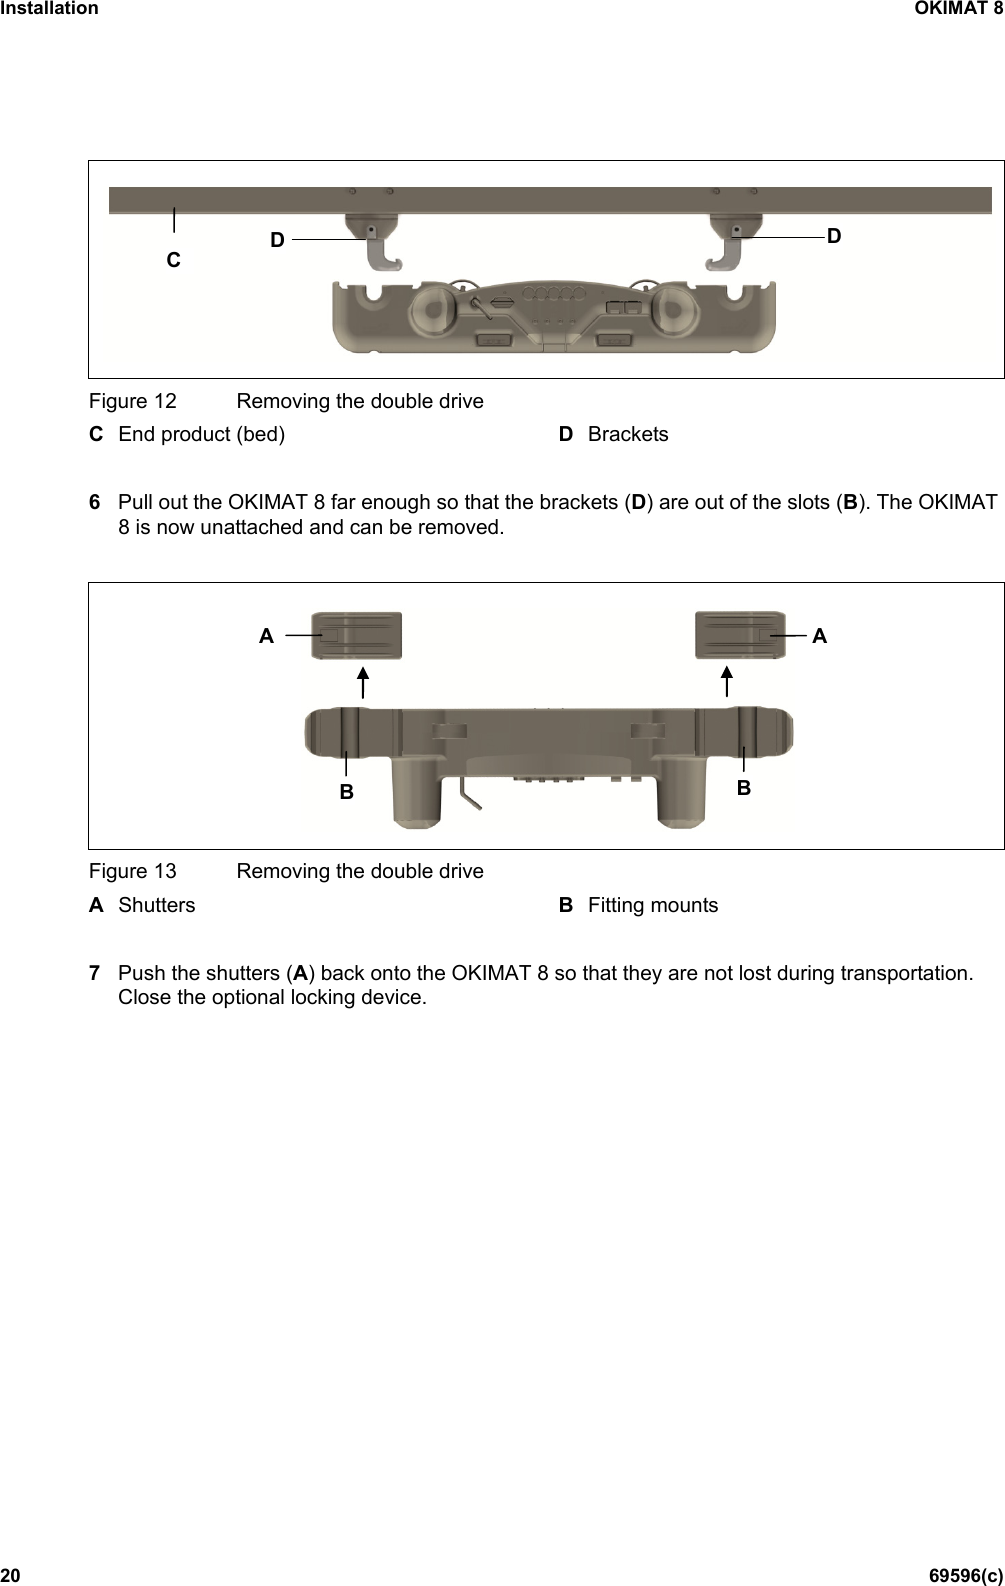 Installation OKIMAT 8 20 69596(c)  Figure 12 Removing the double drive C End product (bed) D Brackets  6  Pull out the OKIMAT 8 far enough so that the brackets (D) are out of the slots (B). The OKIMAT 8 is now unattached and can be removed.   Figure 13 Removing the double drive A  Shutters B  Fitting mounts  7  Push the shutters (A) back onto the OKIMAT 8 so that they are not lost during transportation. Close the optional locking device.  C D D B B A A 